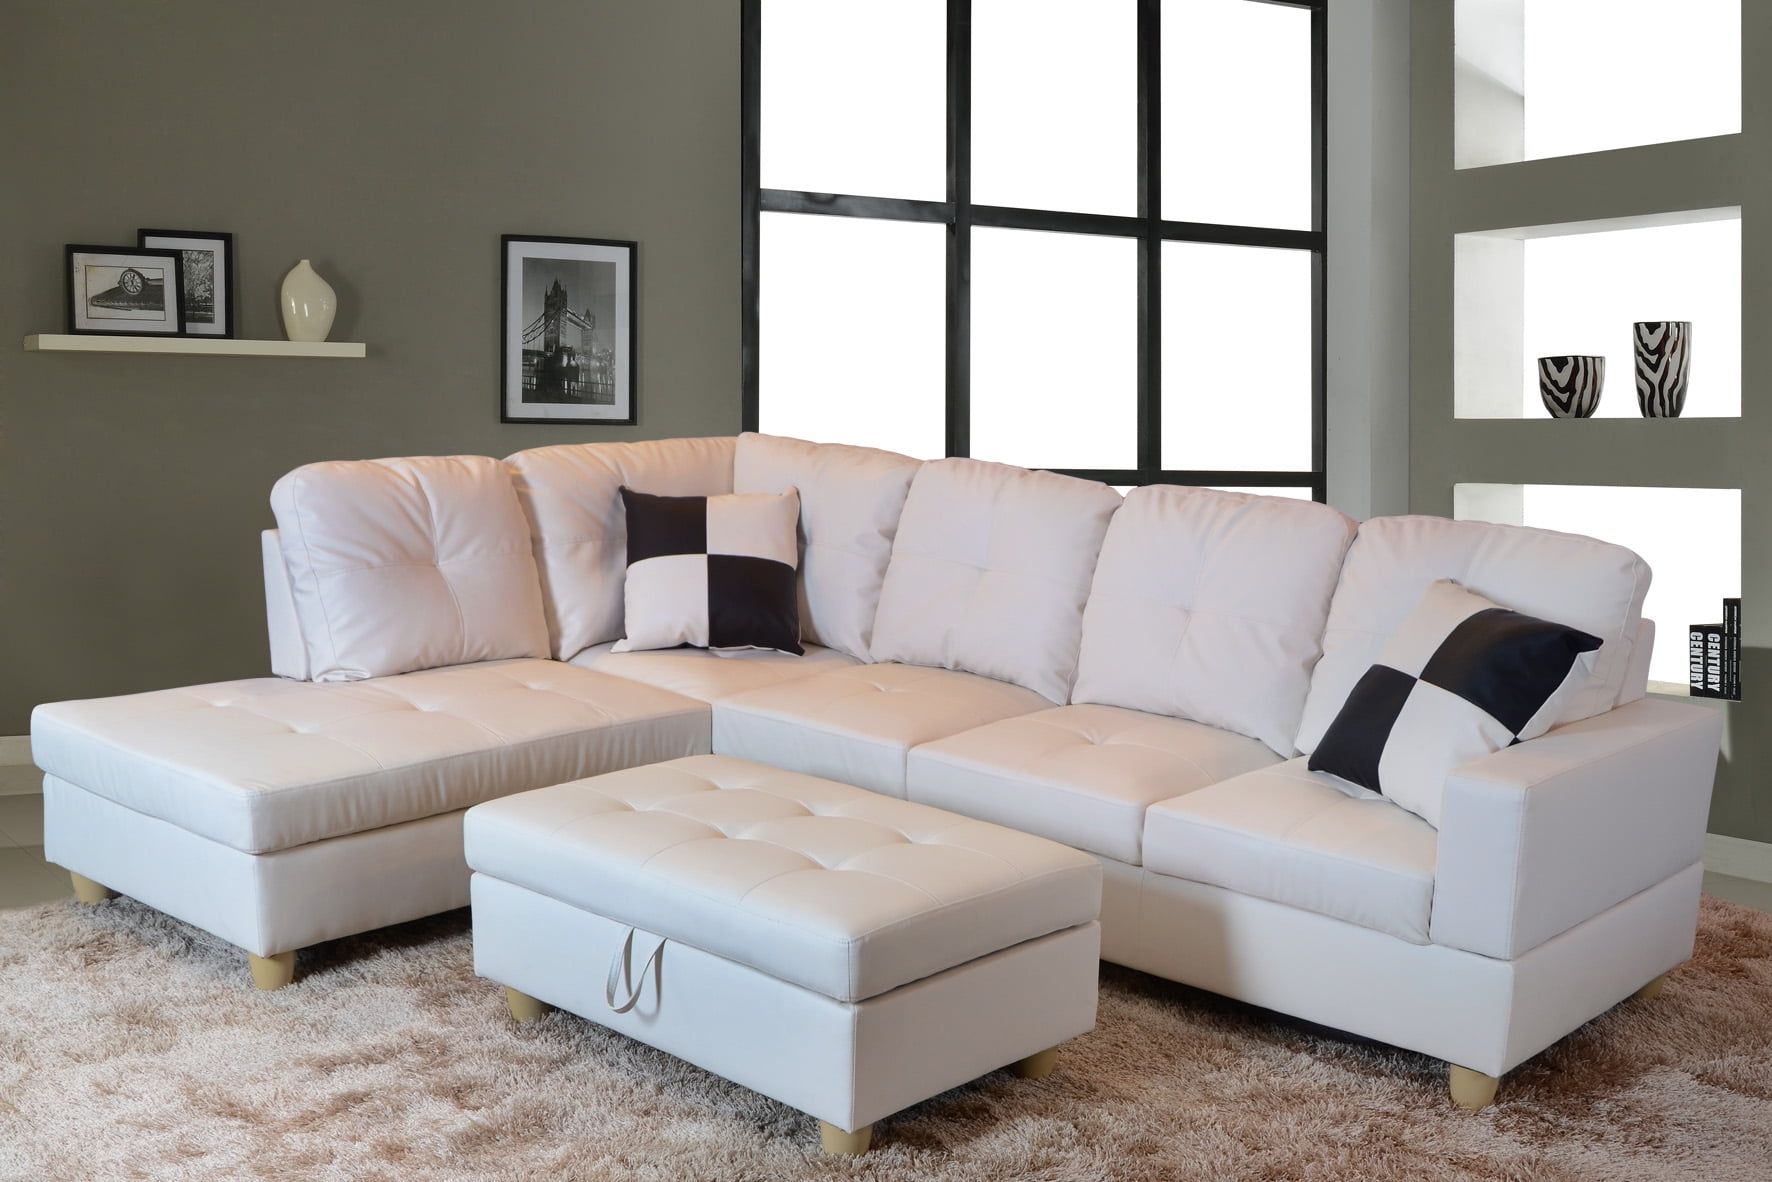 Ponliving Furniture L Shape Traditional Sectional Sofa Set With Ottoman Regarding Faux Leather Sectional Sofa Sets (View 11 of 21)